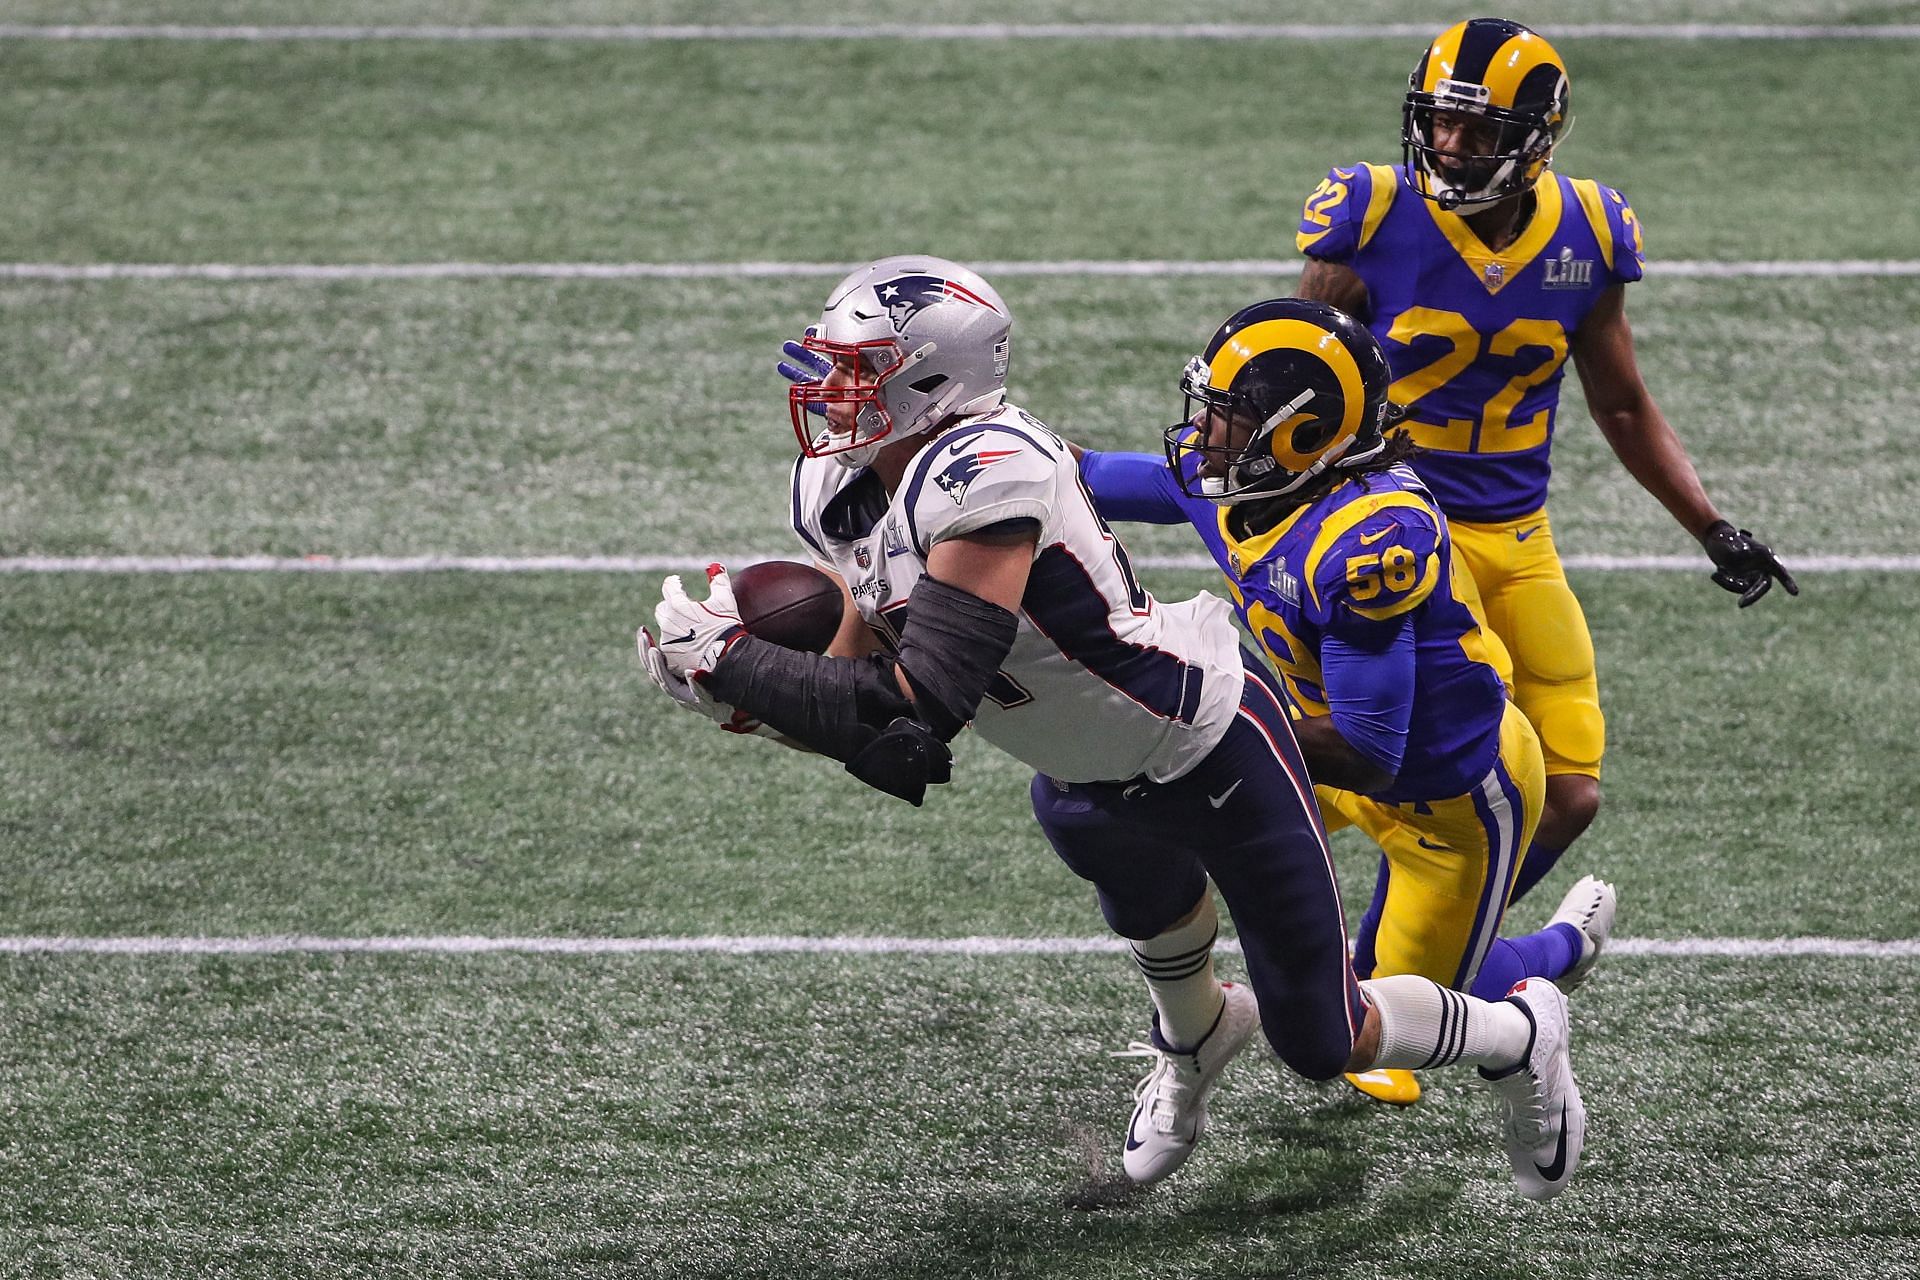 Gronkowski makes a crucial catch in Super Bowl LIII